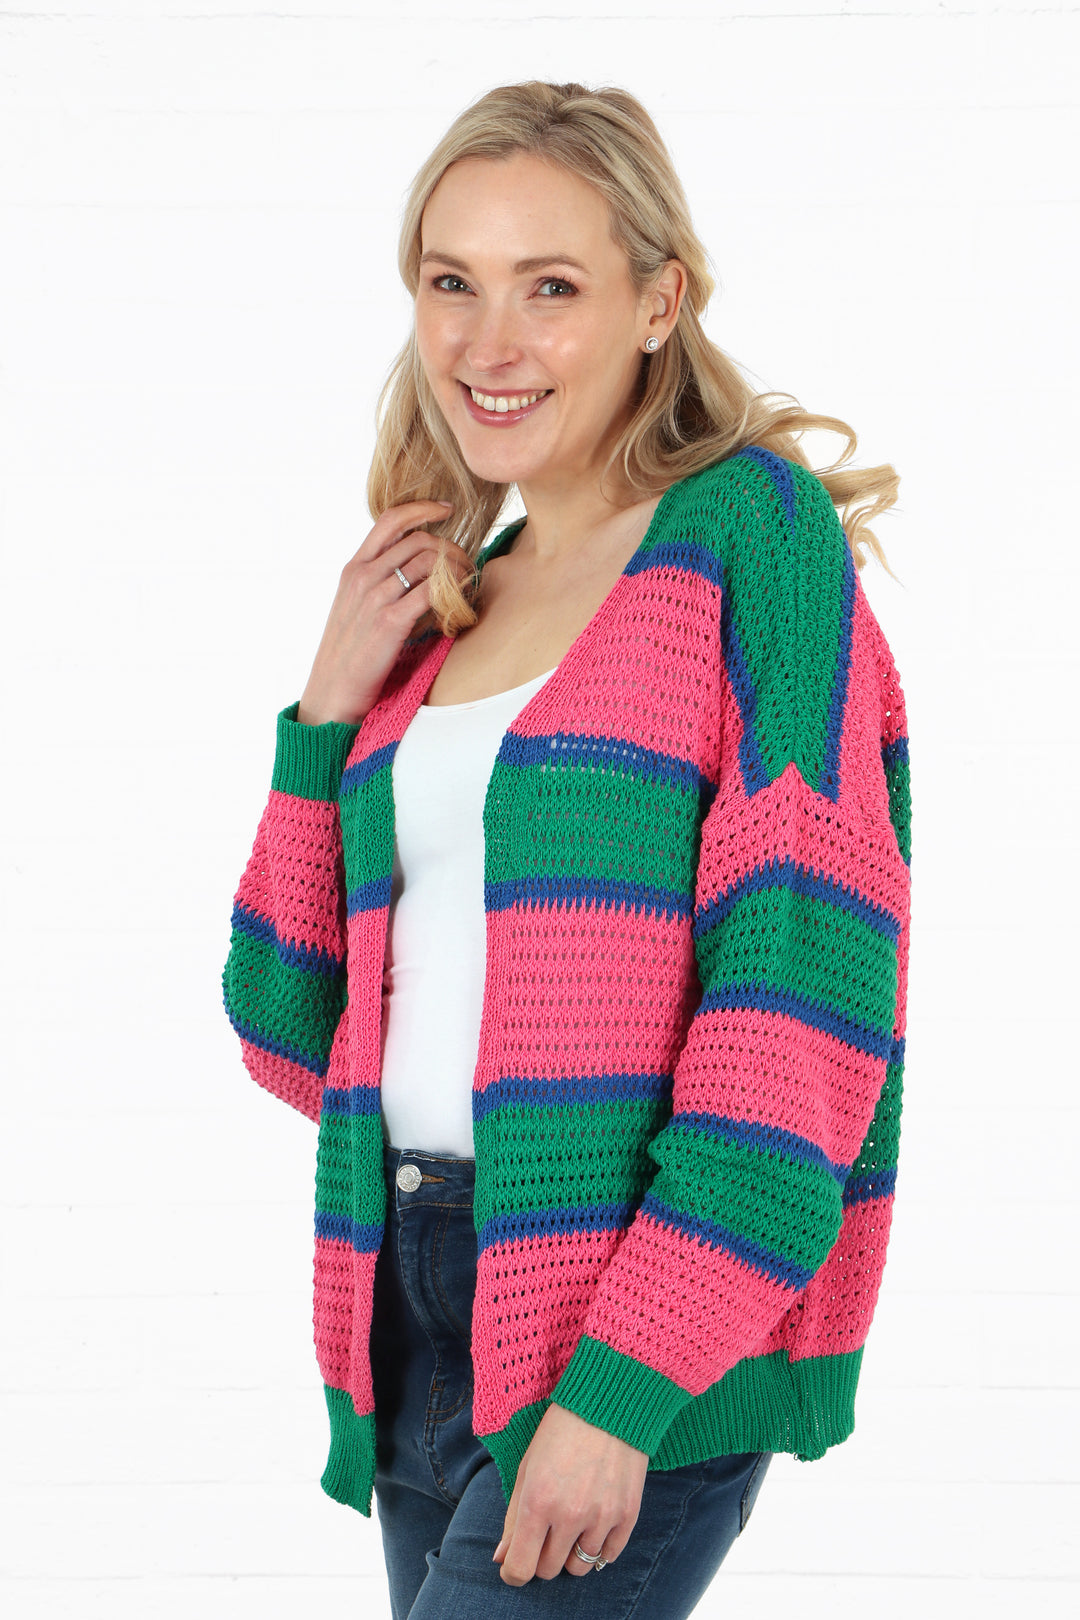 model showing the side view of the pink, green and blue striped cardigan